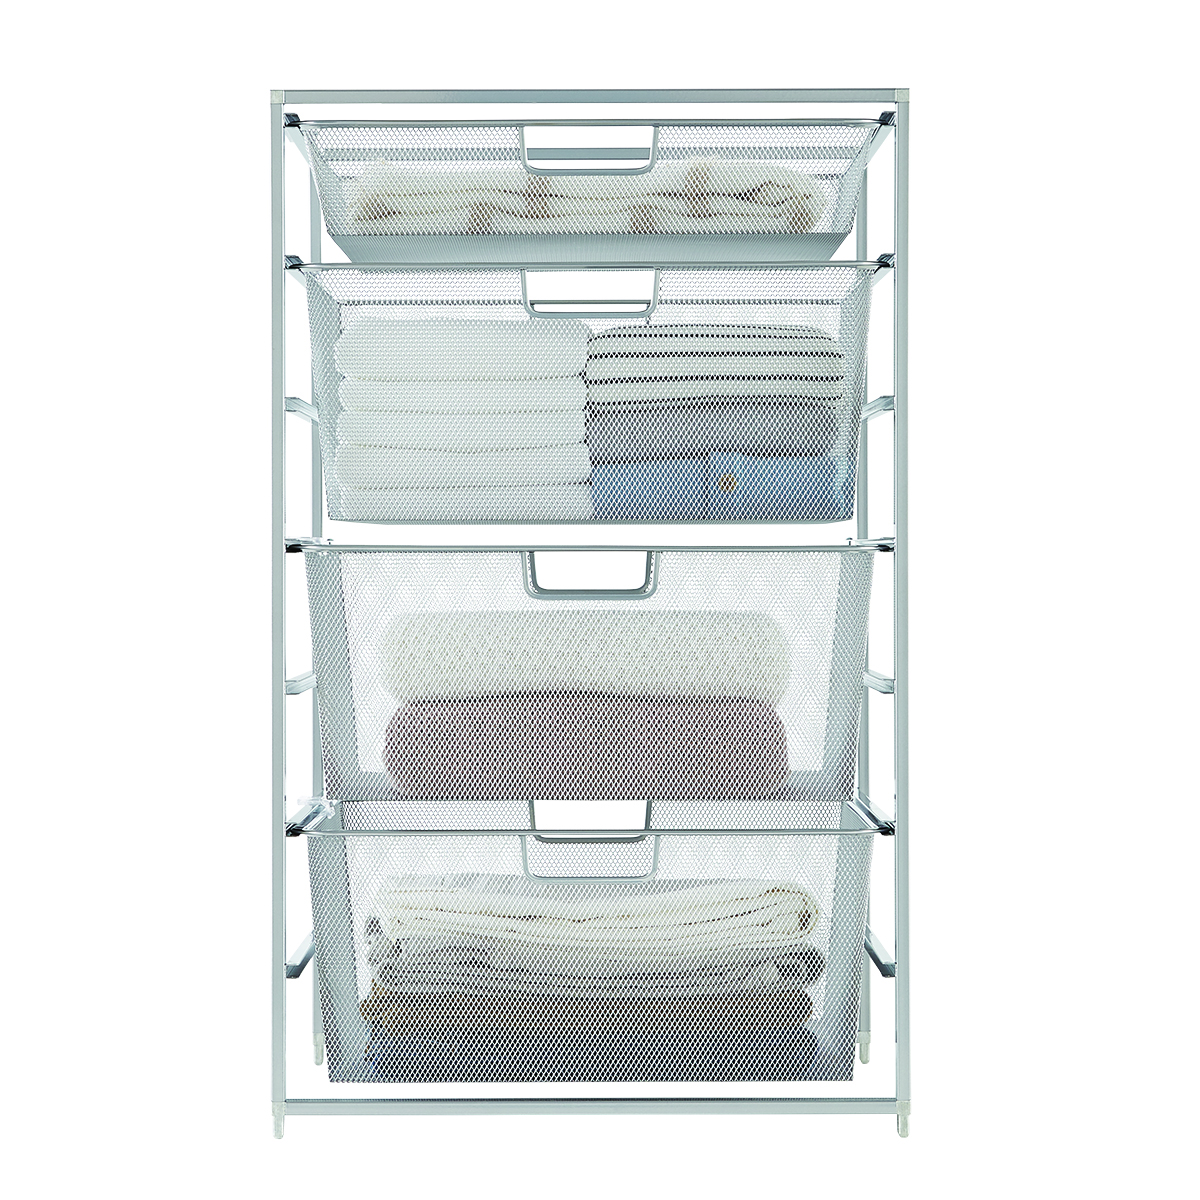 https://images.containerstore.com/catalogimages/415668/600x600xcenter/10037599-elfa-Mesh-Start-A-Stack-Pro.jpg